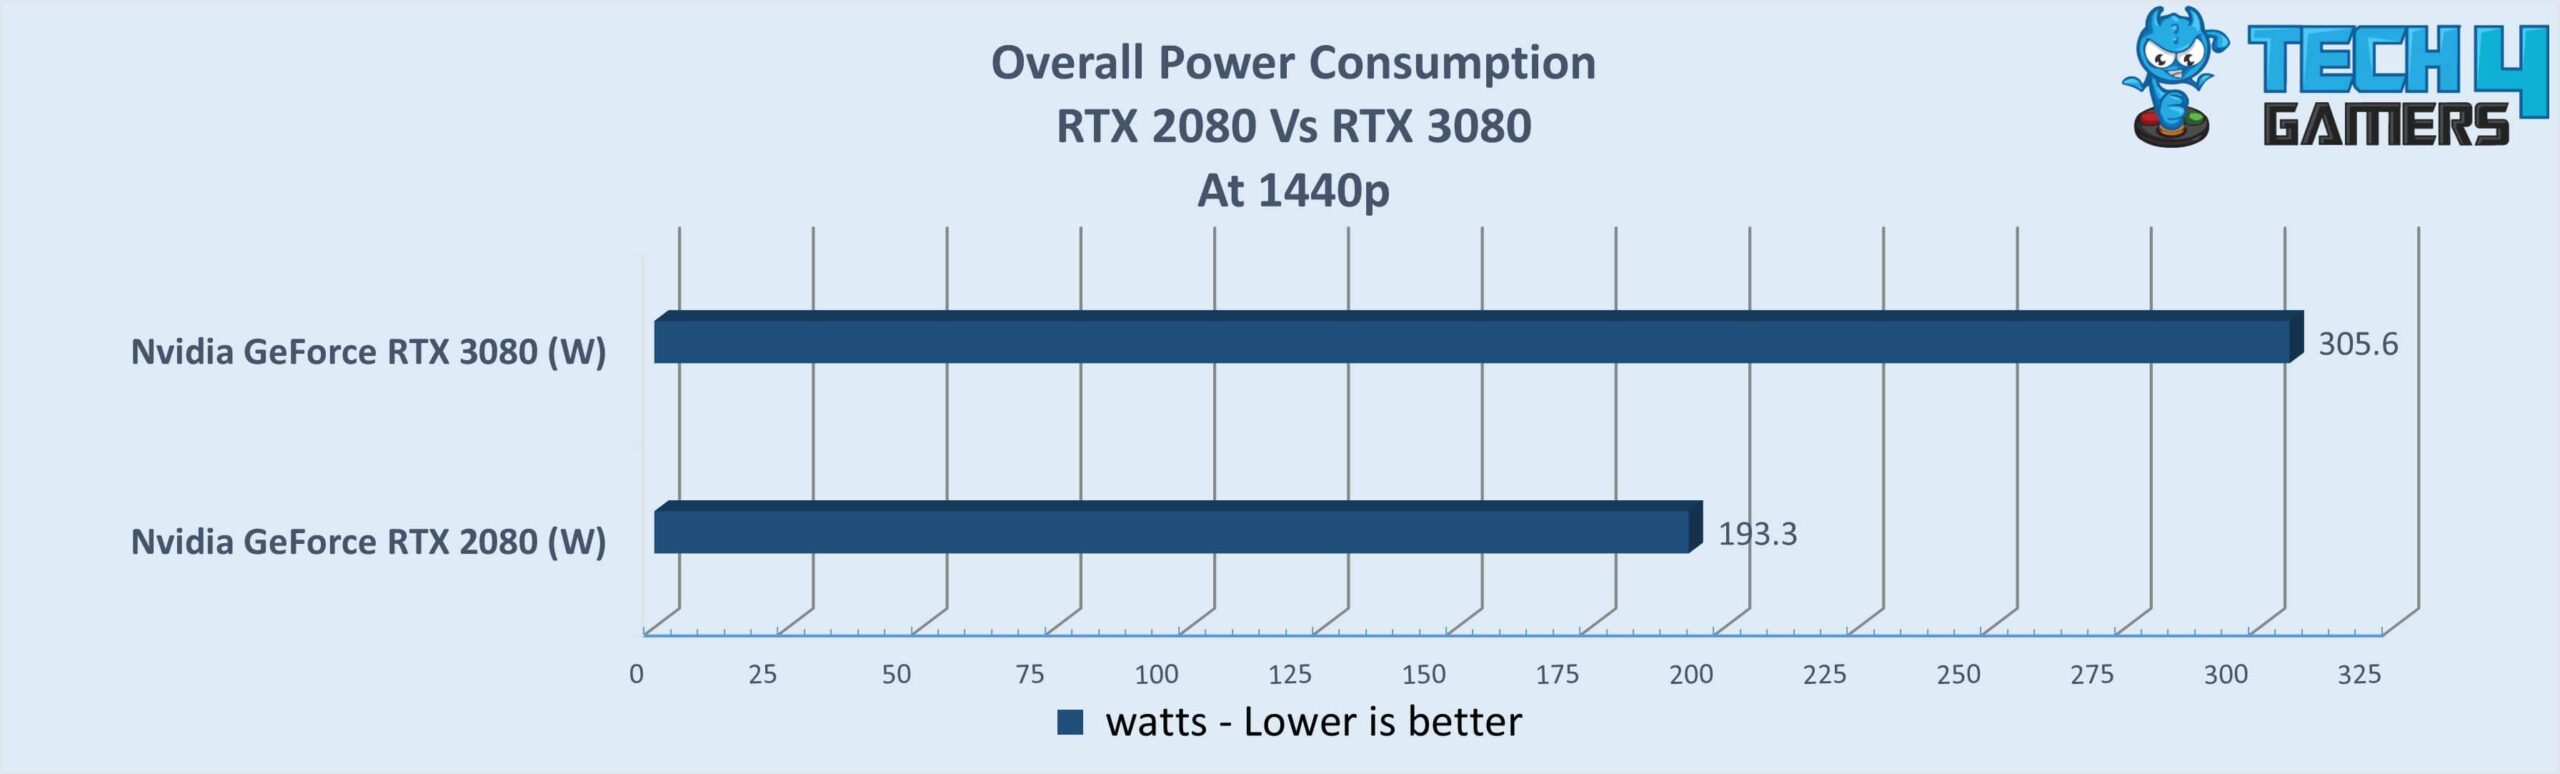 Overall Power Consumption of 2 GPUs